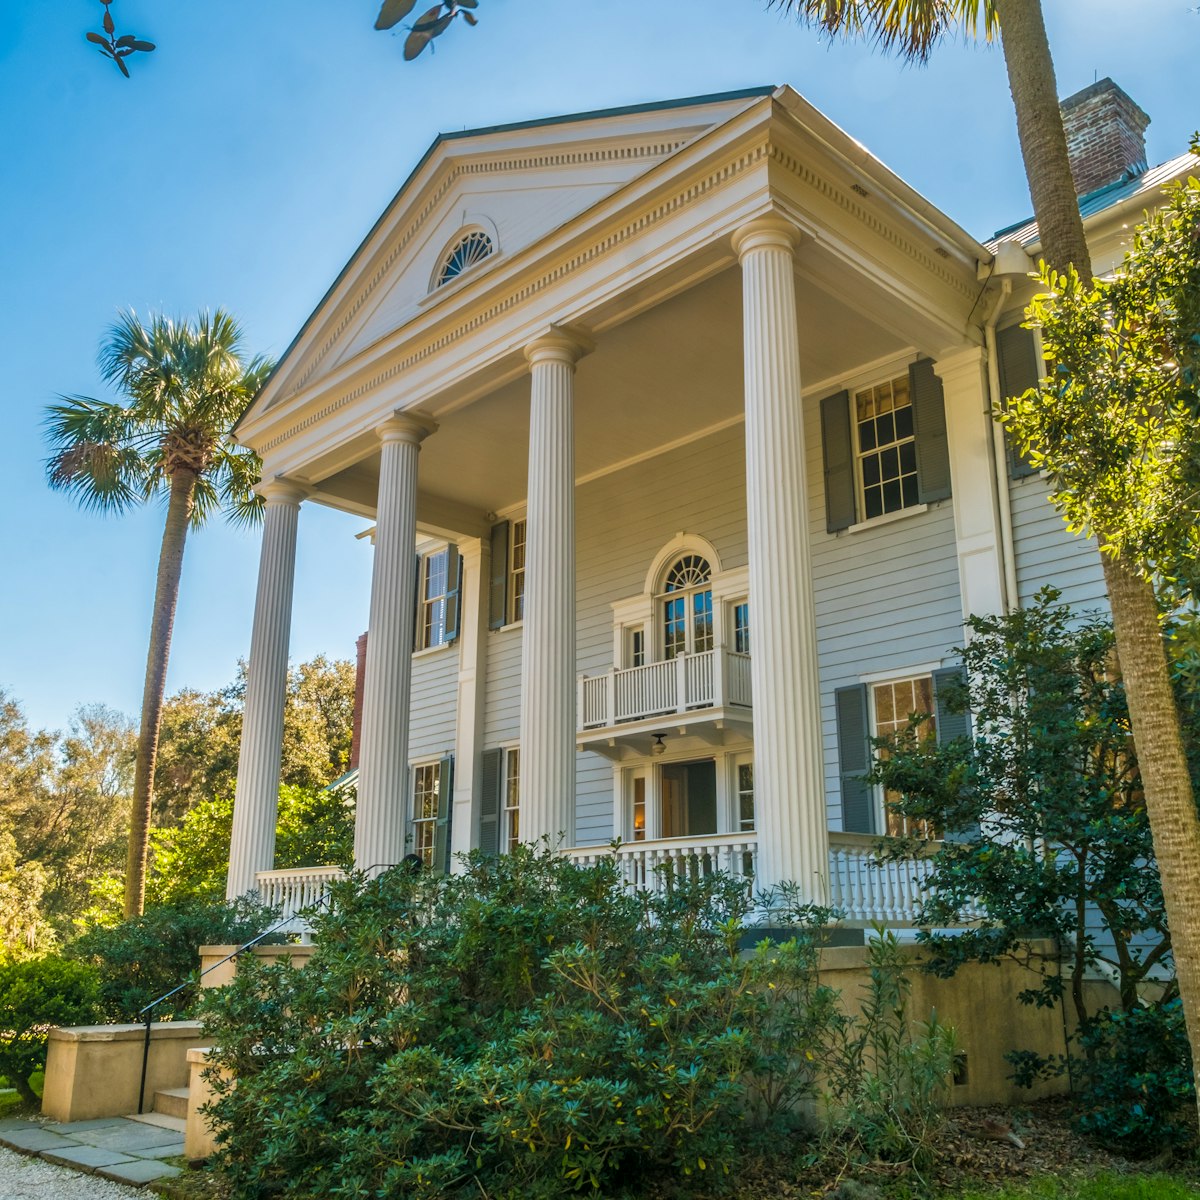 The Georgian-style mansion at the historical McLeod plantation.